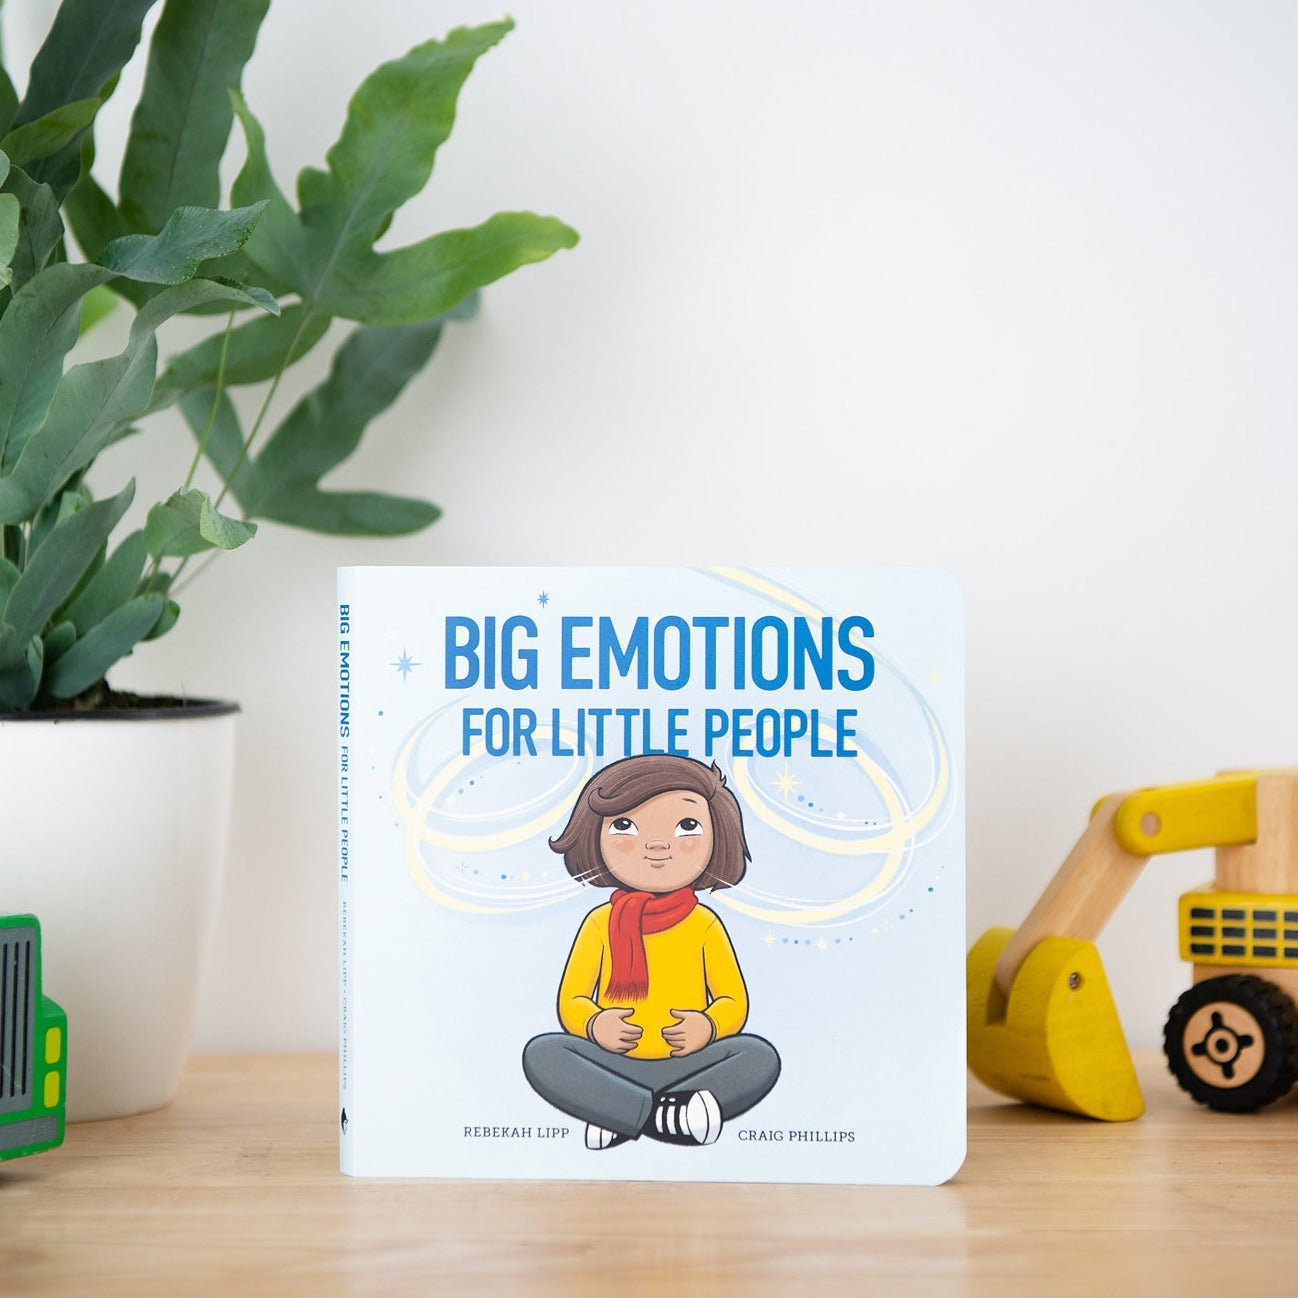 Big Emotions for Little People - Board Book sitting on table-top amongst toys.